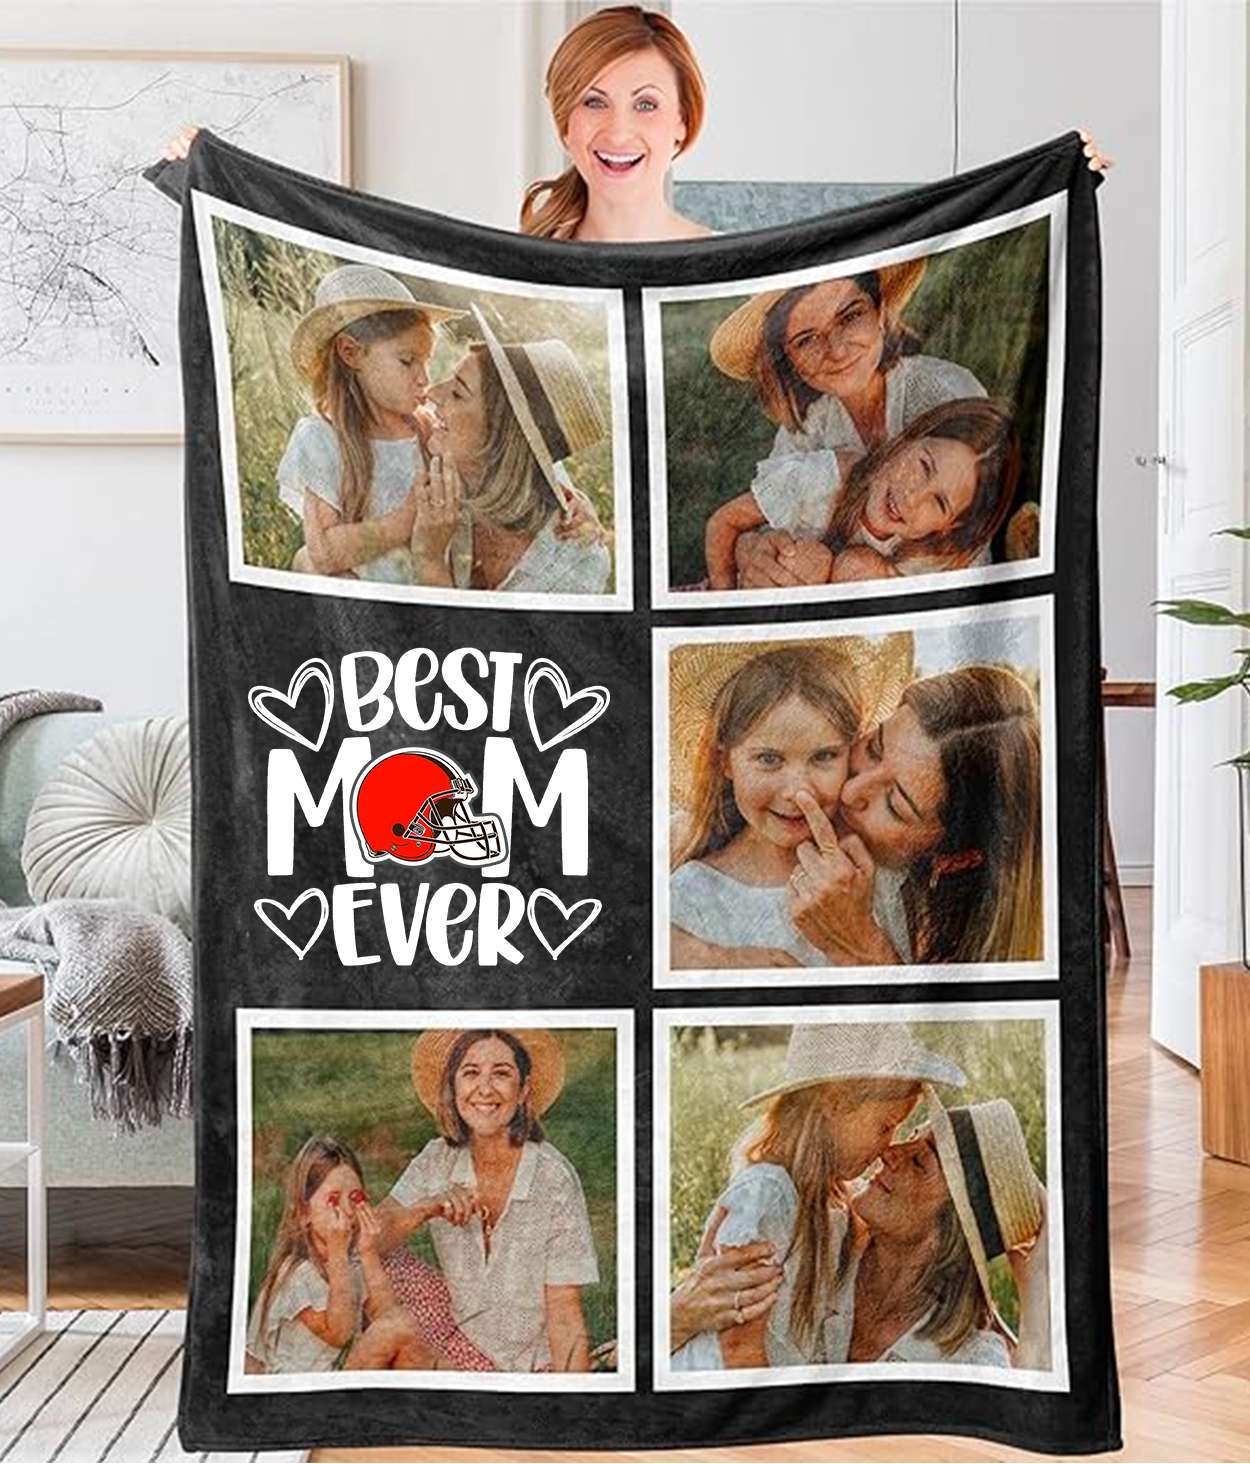 Best Mom Ever - Custom NFL Cleveland Browns Blankets with Pictures for Mother's Day Gift